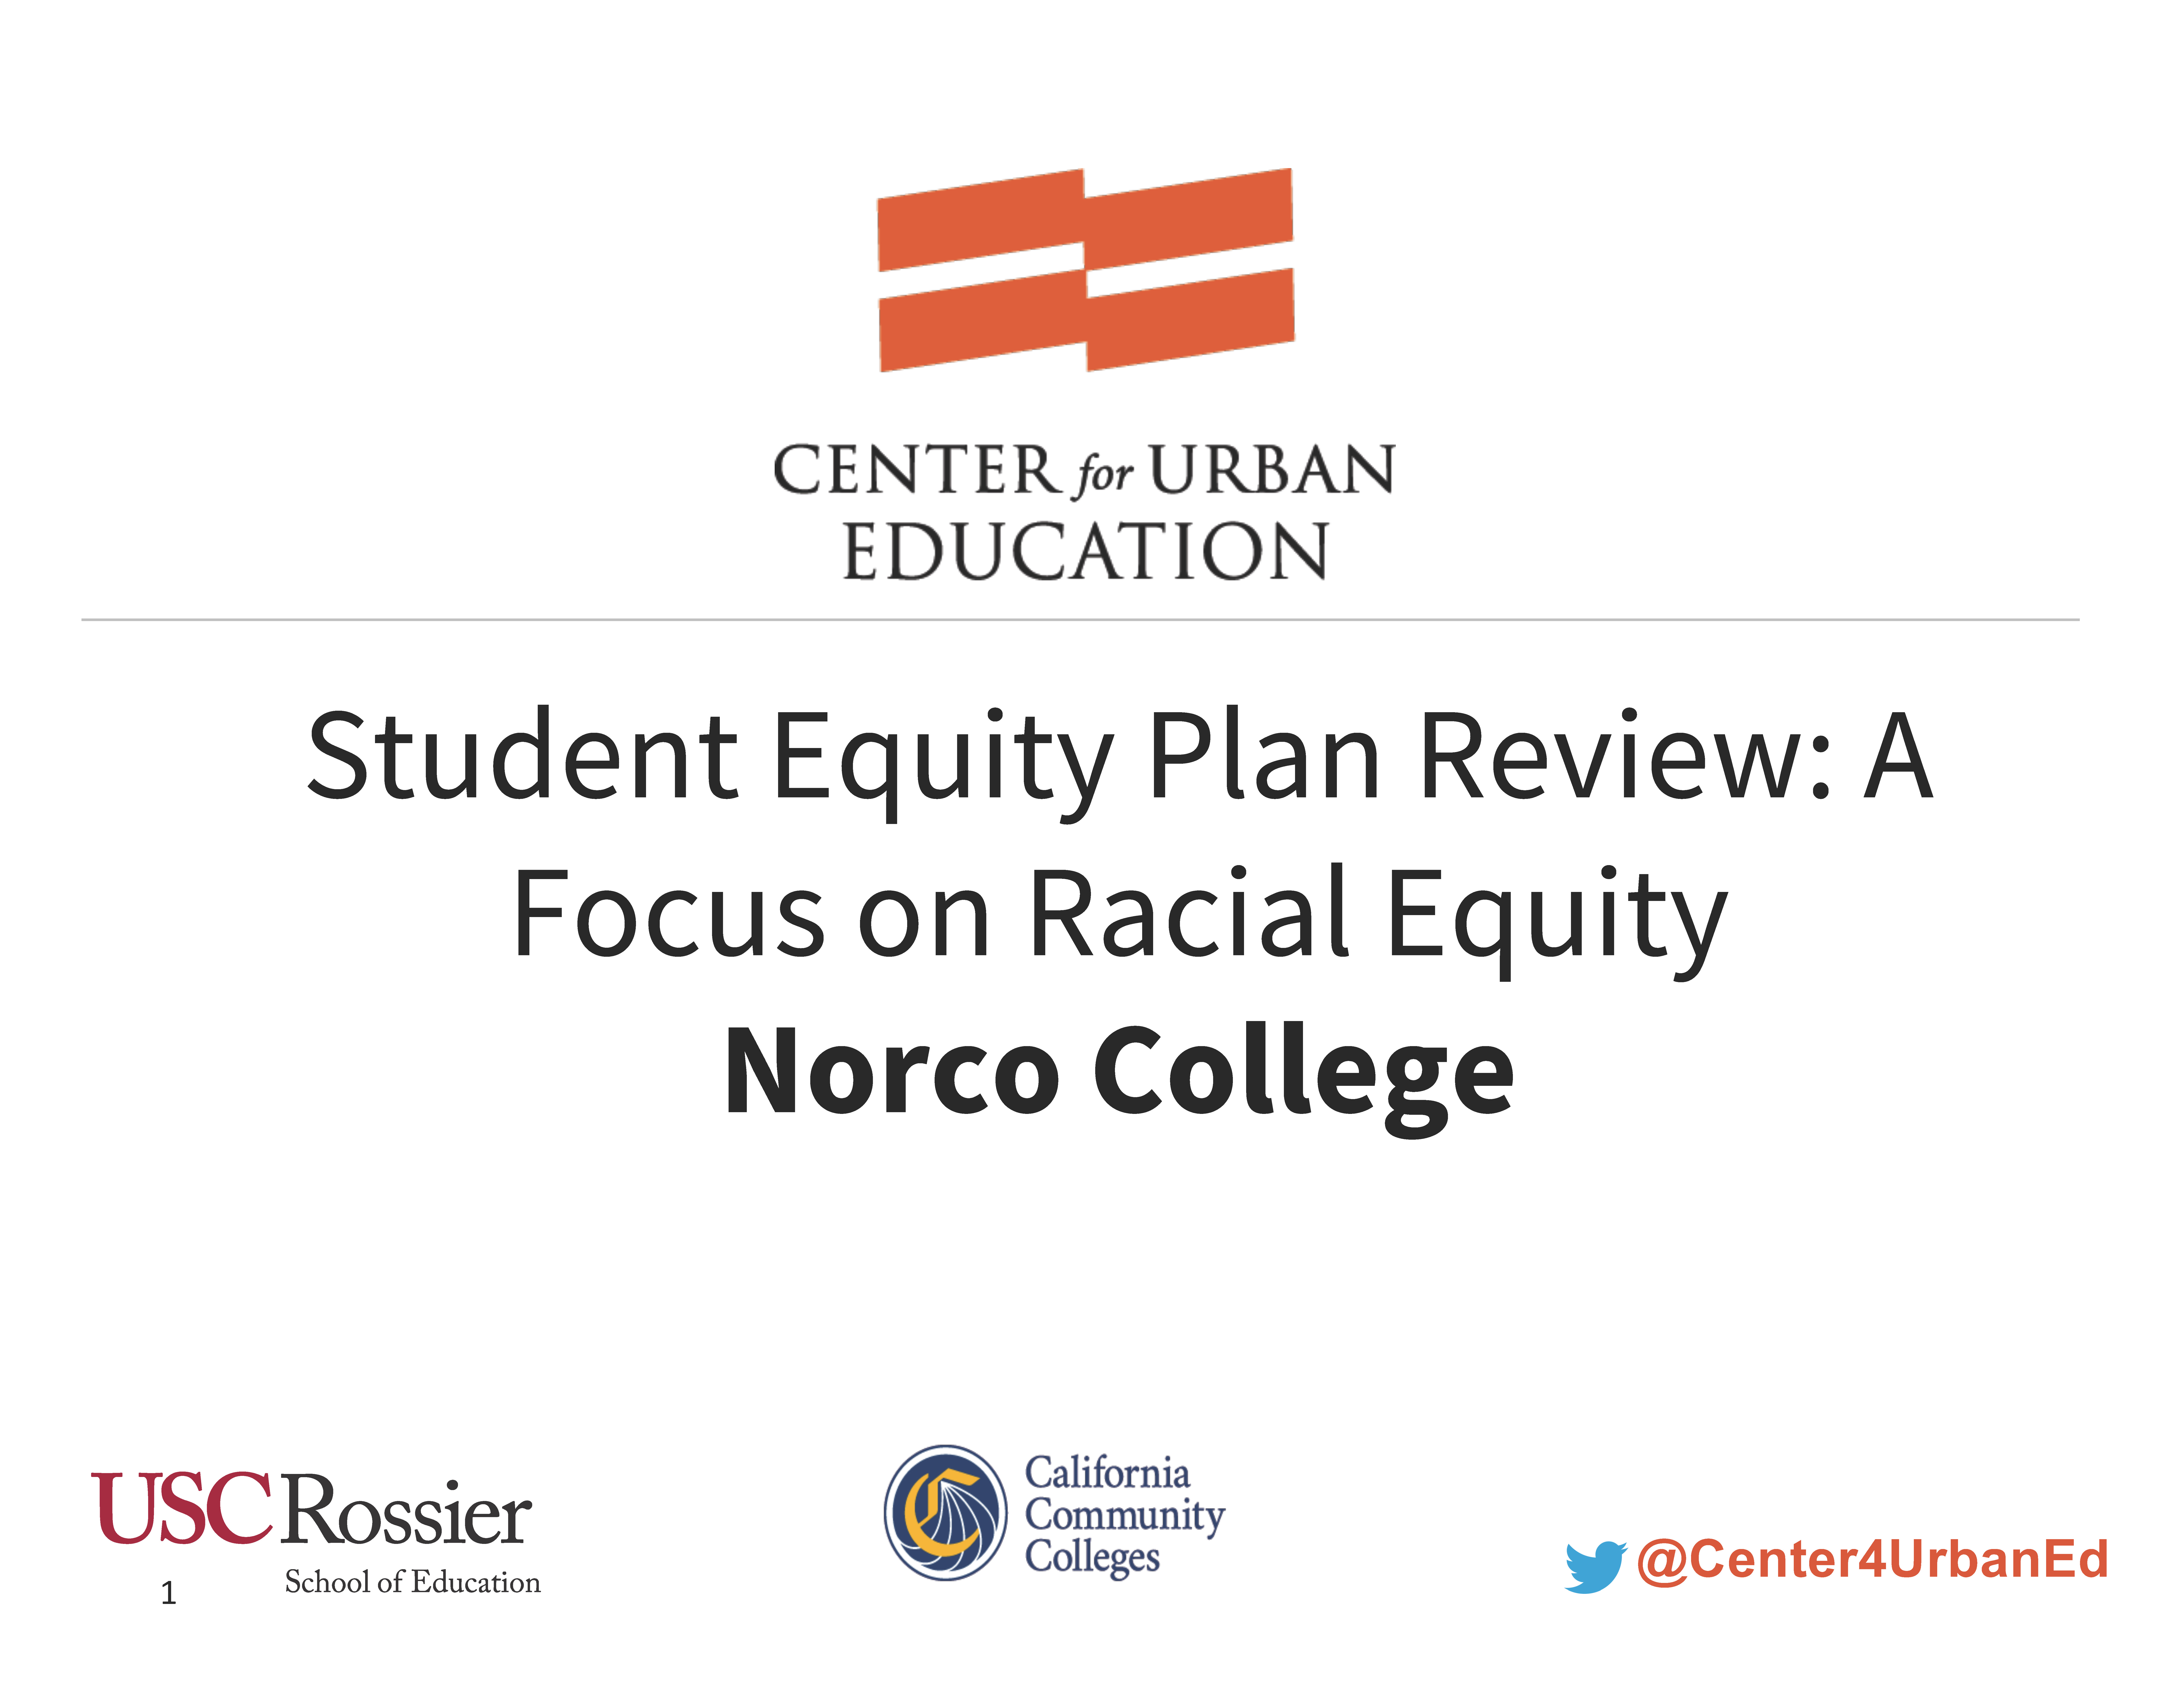 2019-2022 Student Equity Plan Review - Center for Urban Education